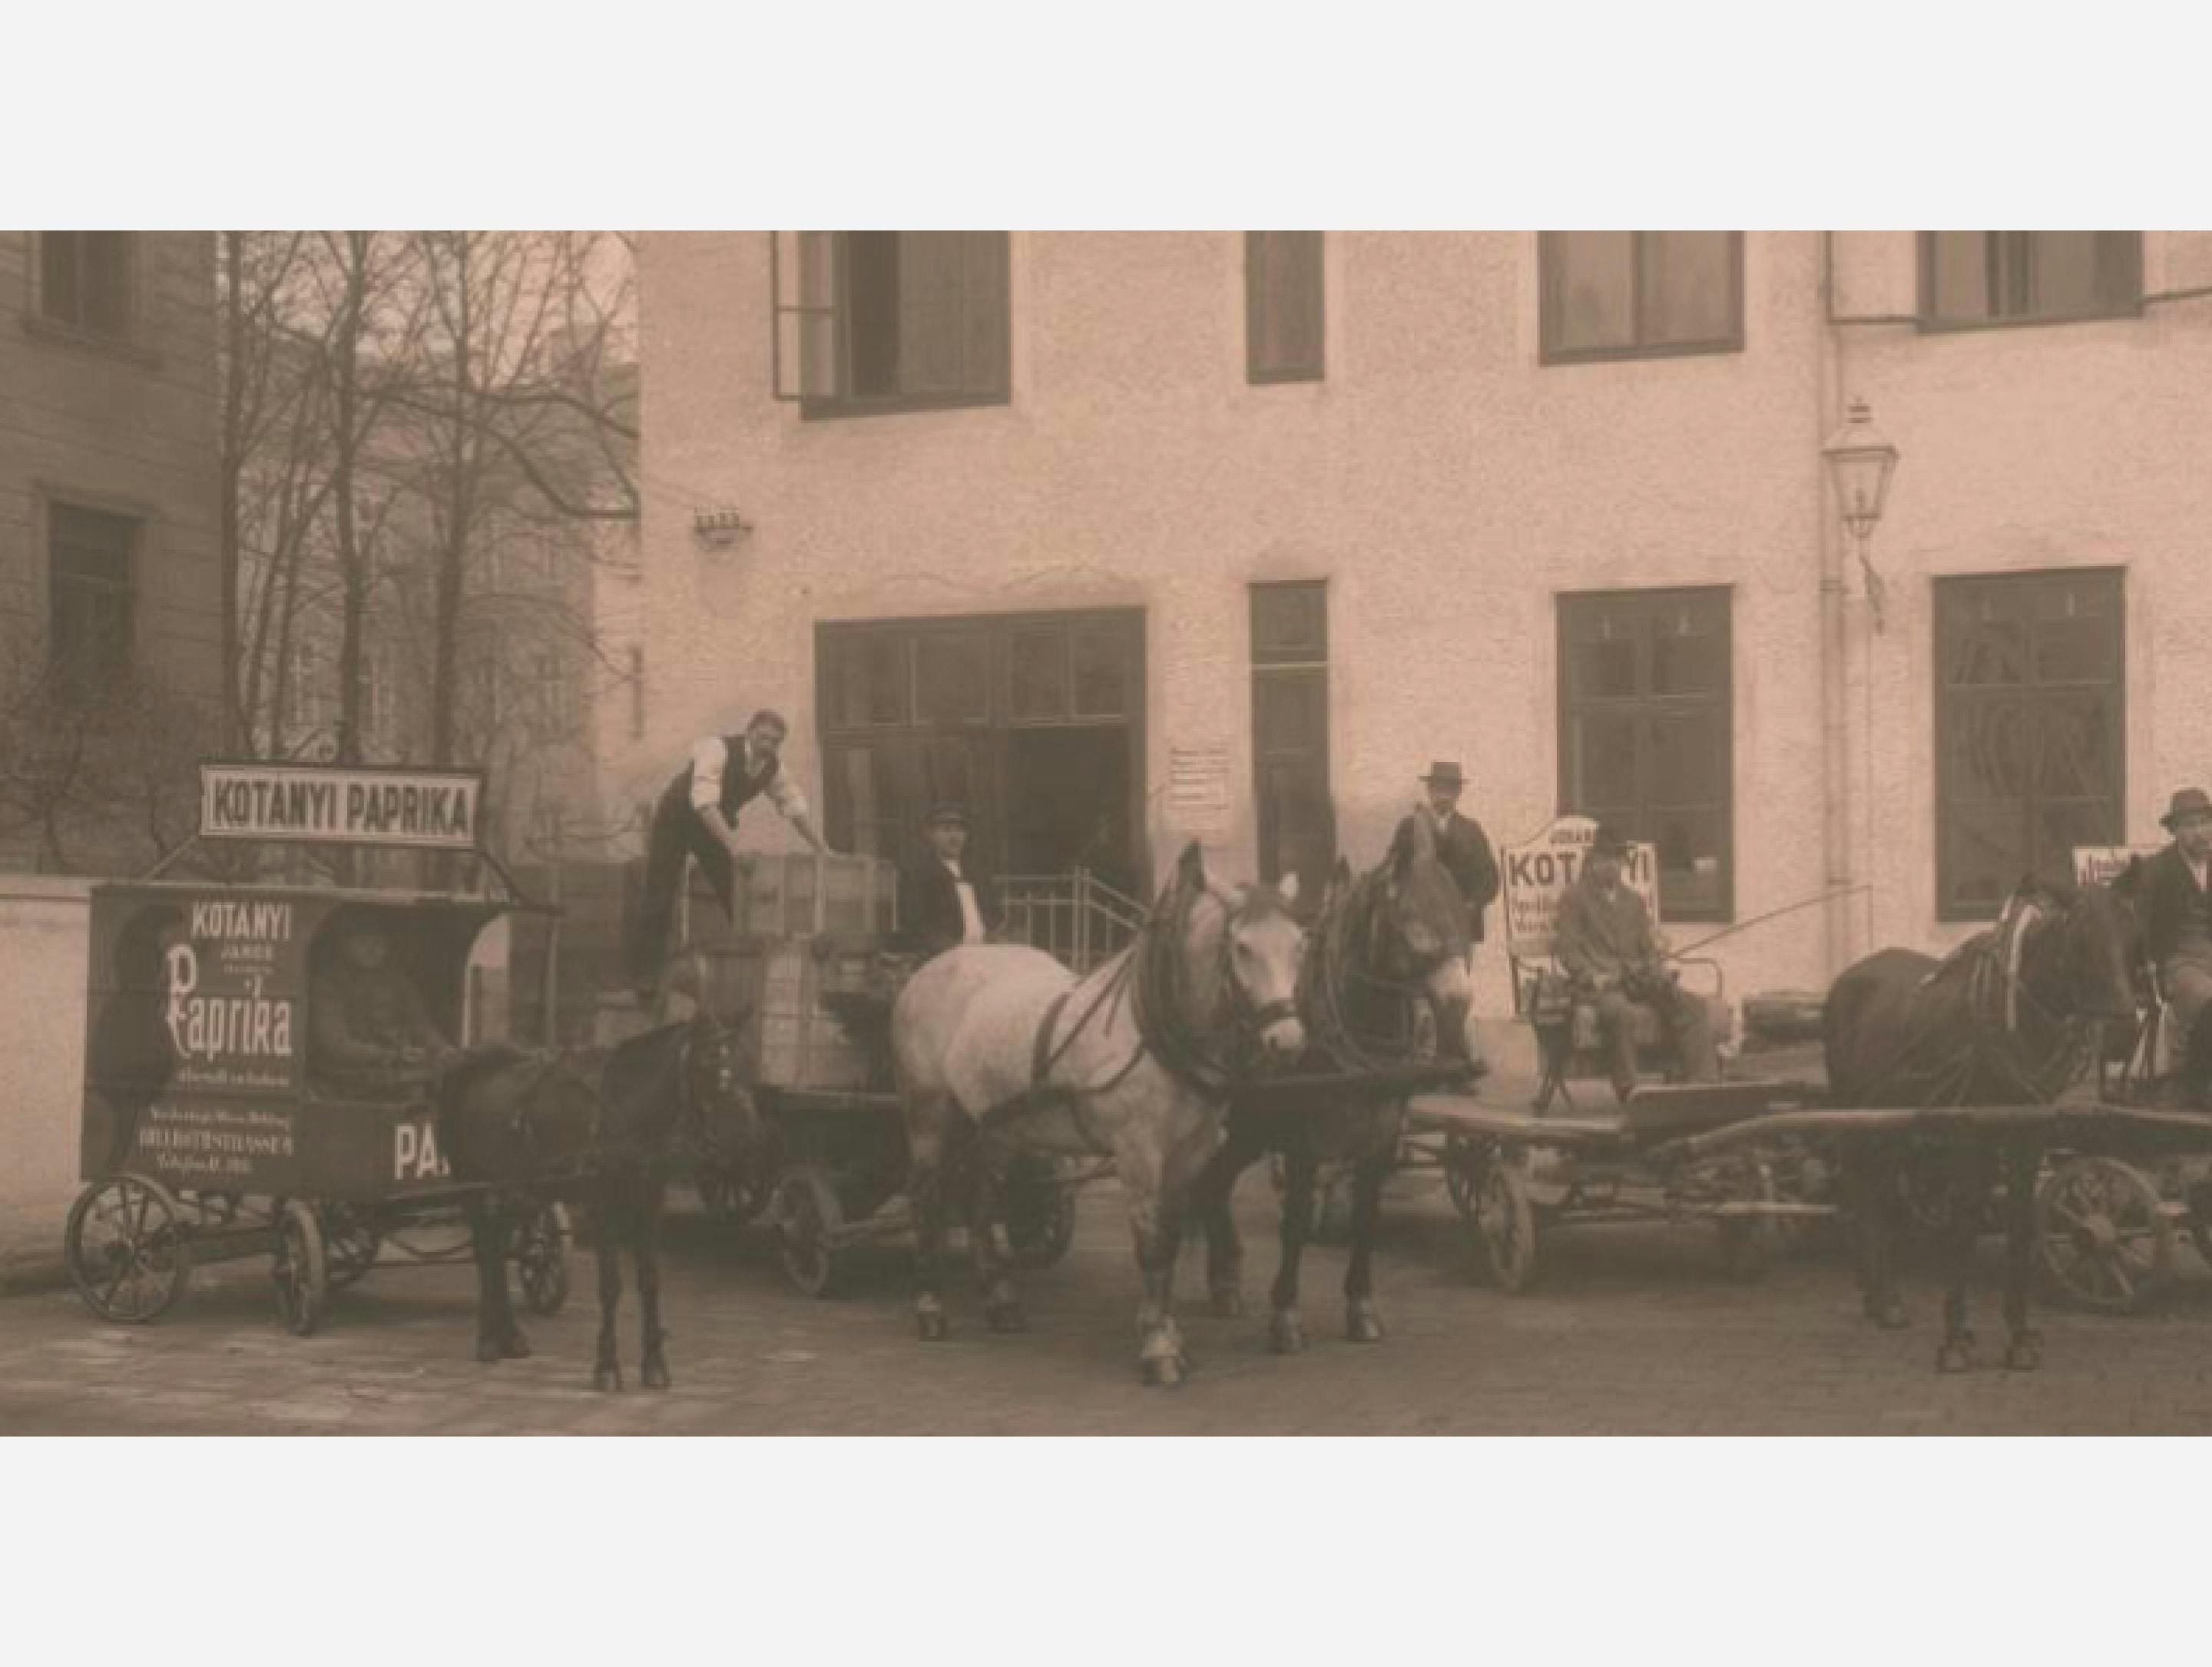 Black-and-white photograph: Paprika deliveries by horse-drawn carriage in 1881